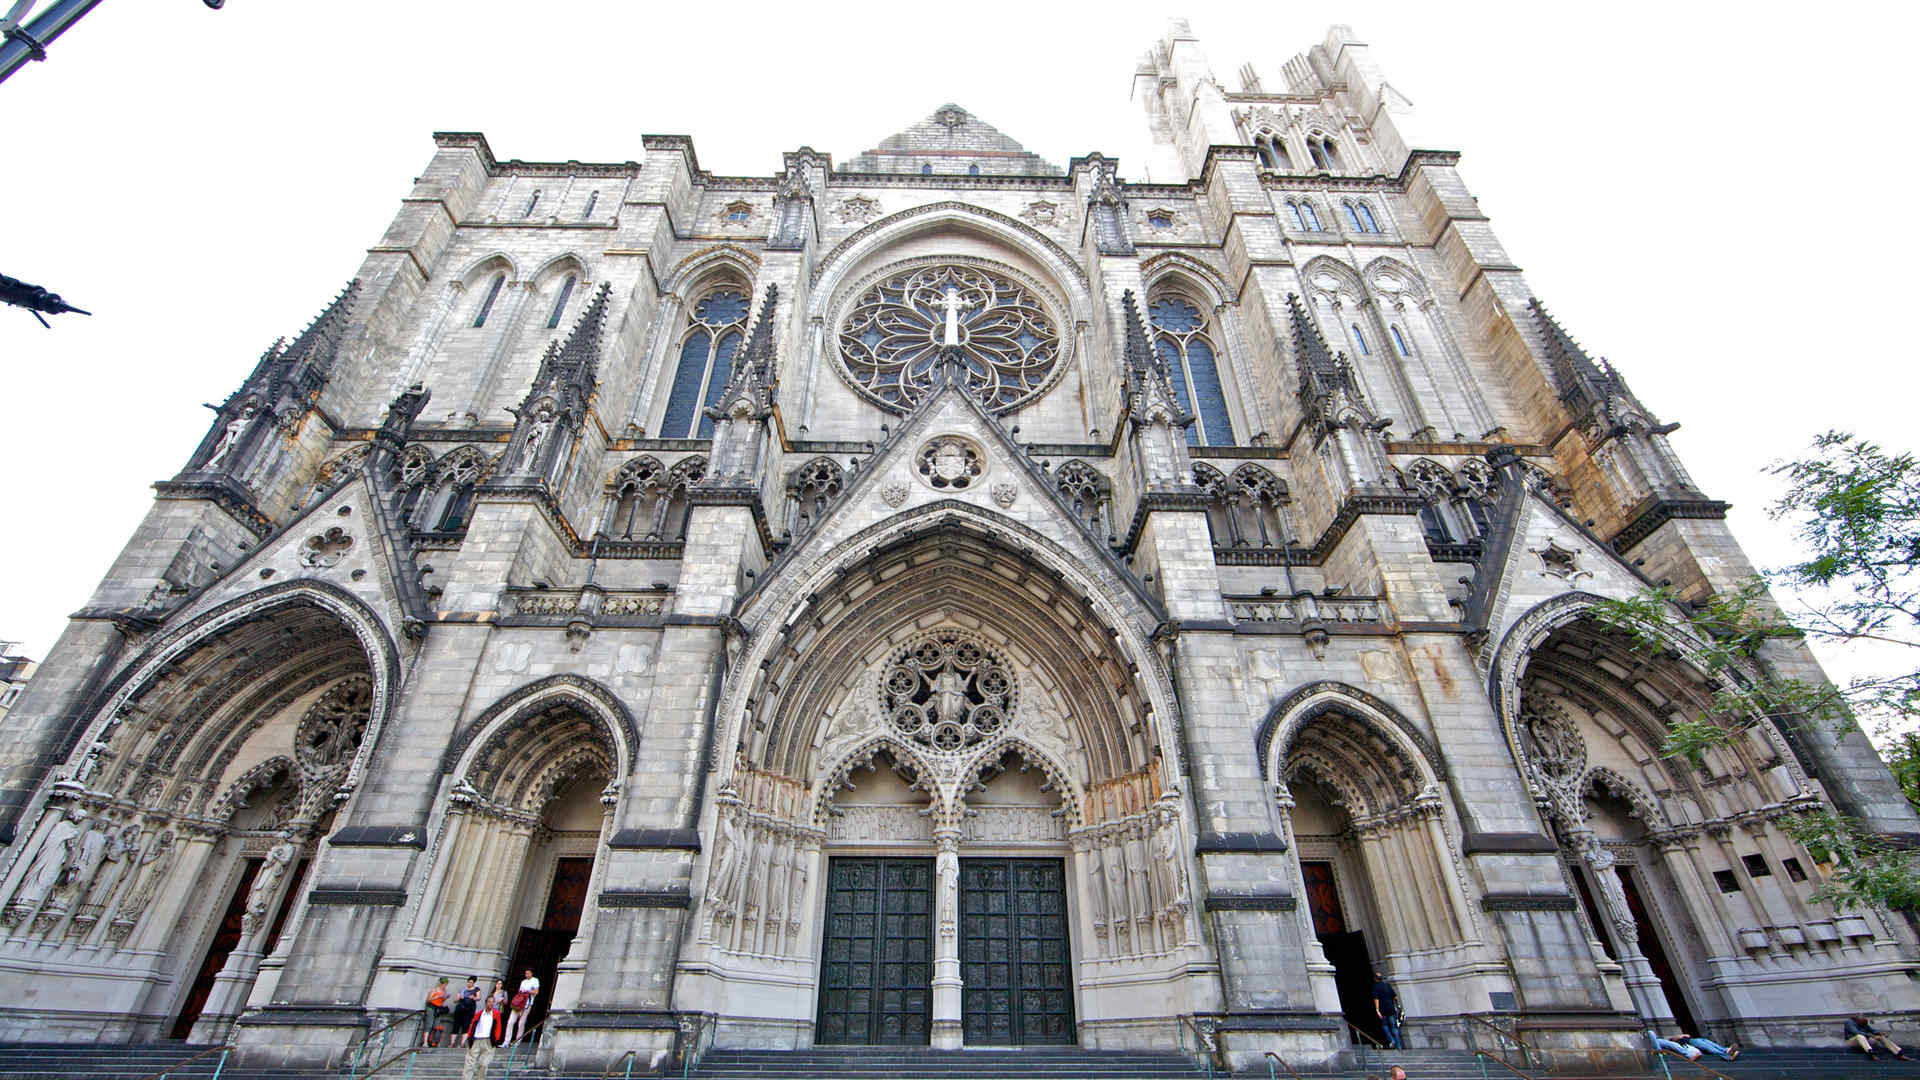 Western facade of the Cathedral of St. John the Divine